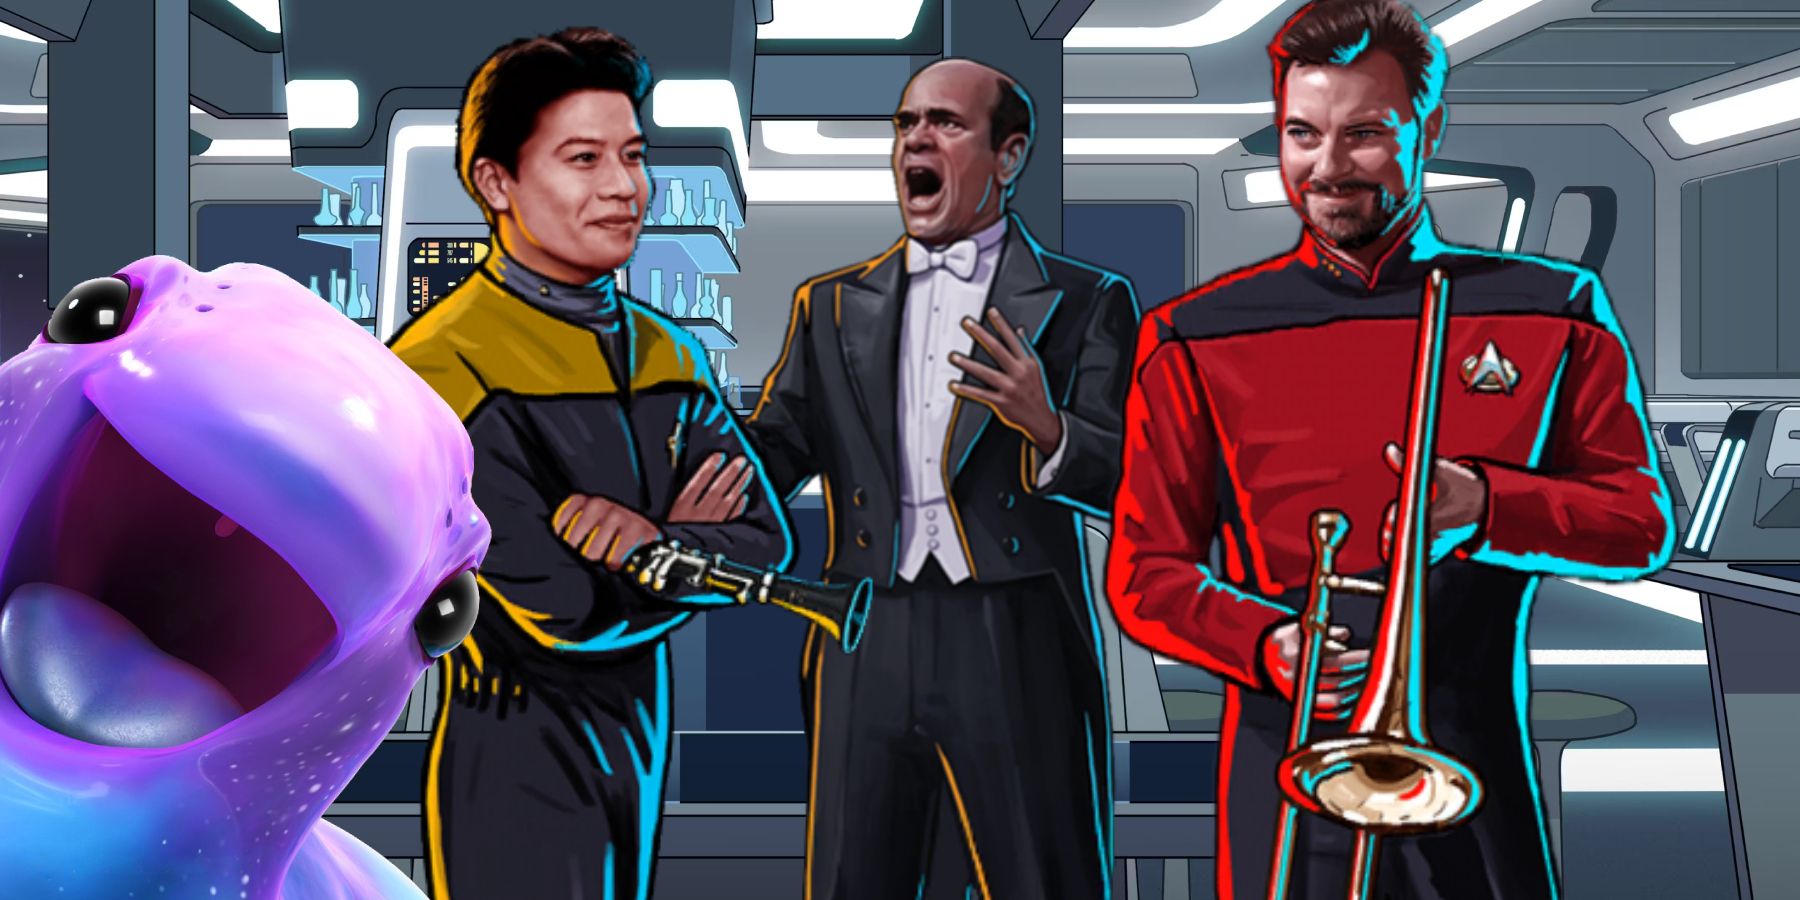 Murf grins as Harry Kim and Riker hold their musical instruments as the Doctor sings a solo